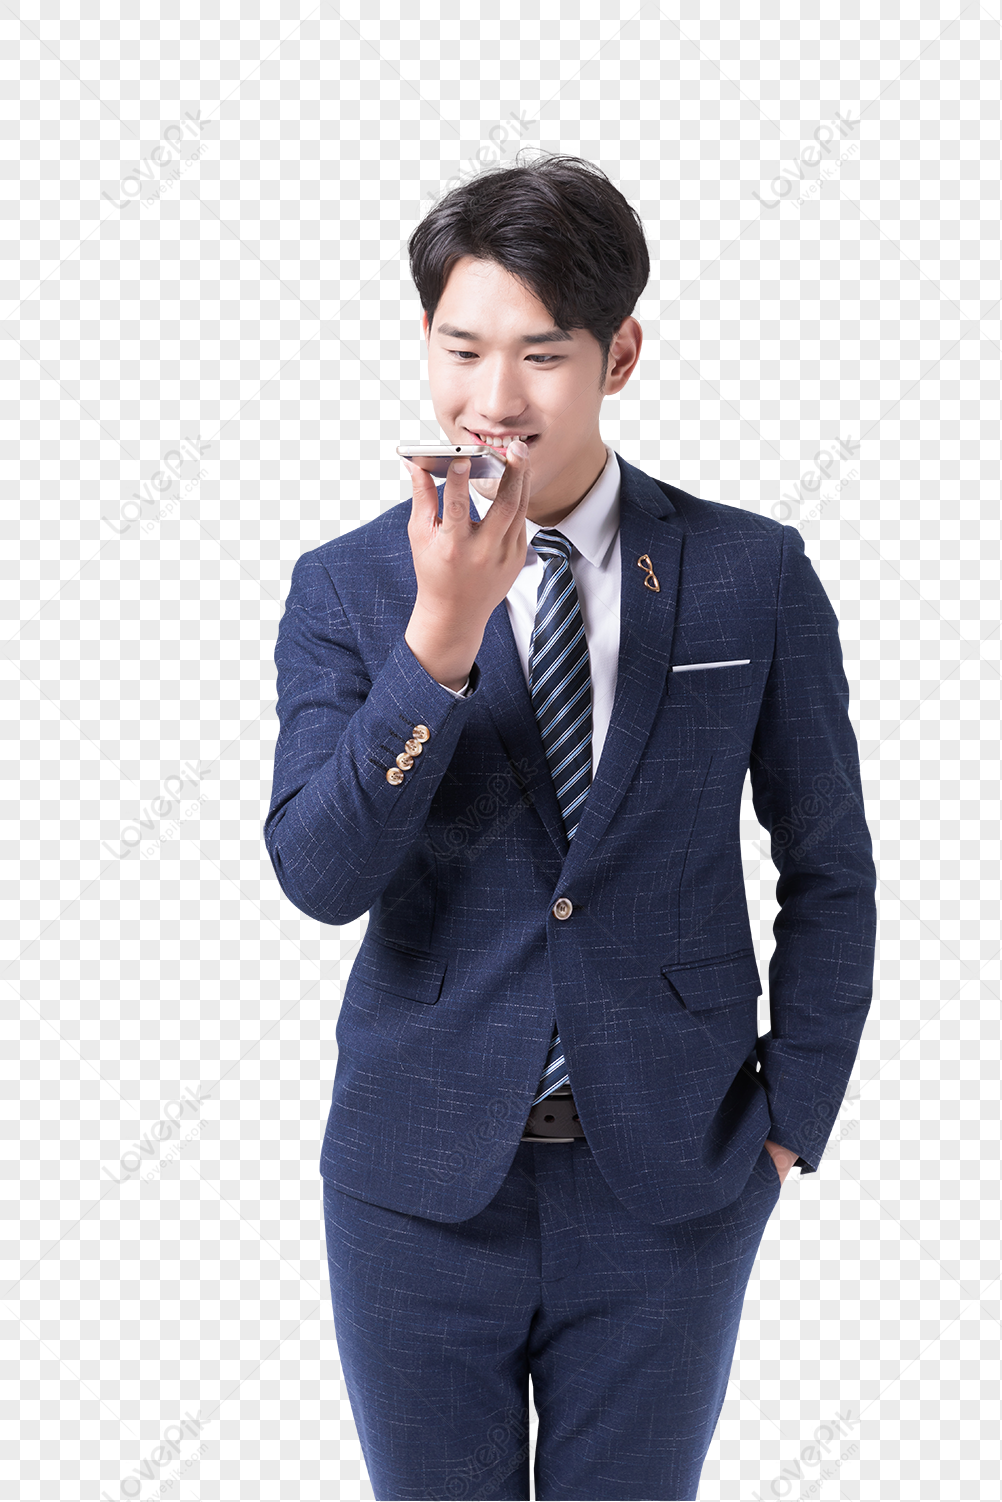 Male Business Mobile Office, Businessman Suit, Cigarette Smoking, Navy Suit  PNG Transparent Background And Clipart Image For Free Download - Lovepik